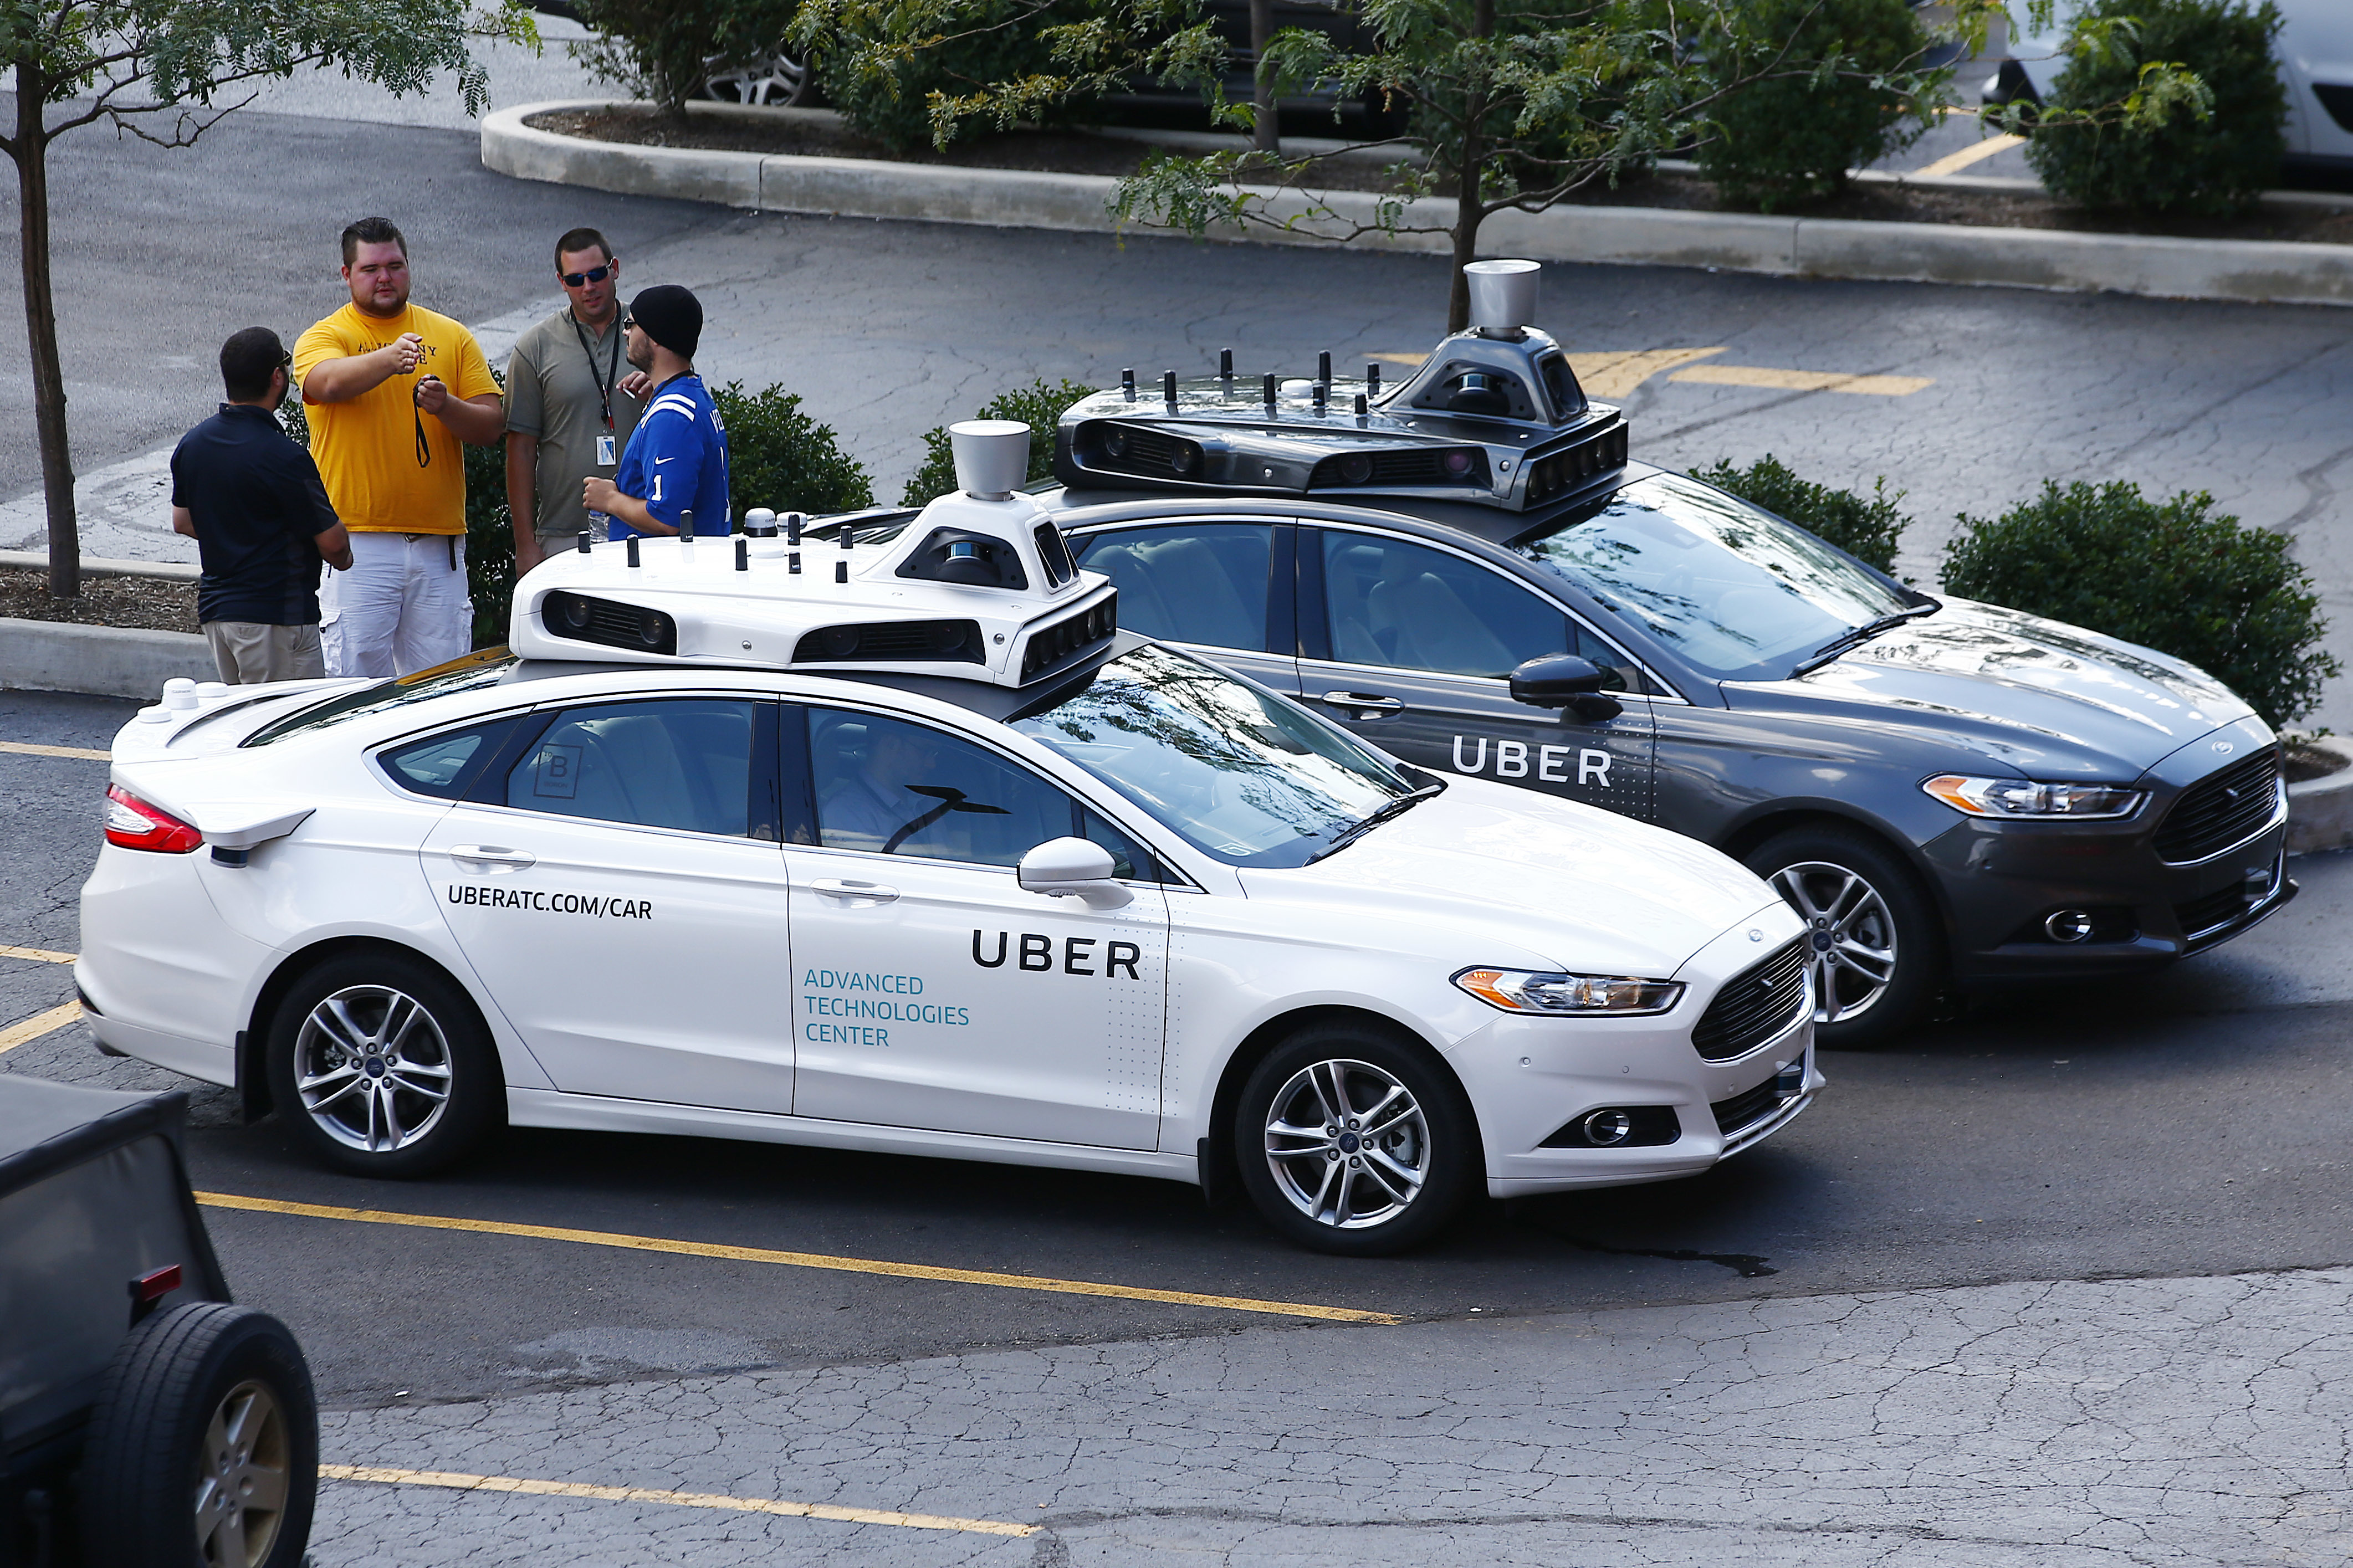 Uber's self-driving cars are being tested in Pittsburgh, August 2016 (AP Photo/Jared Wickerham)